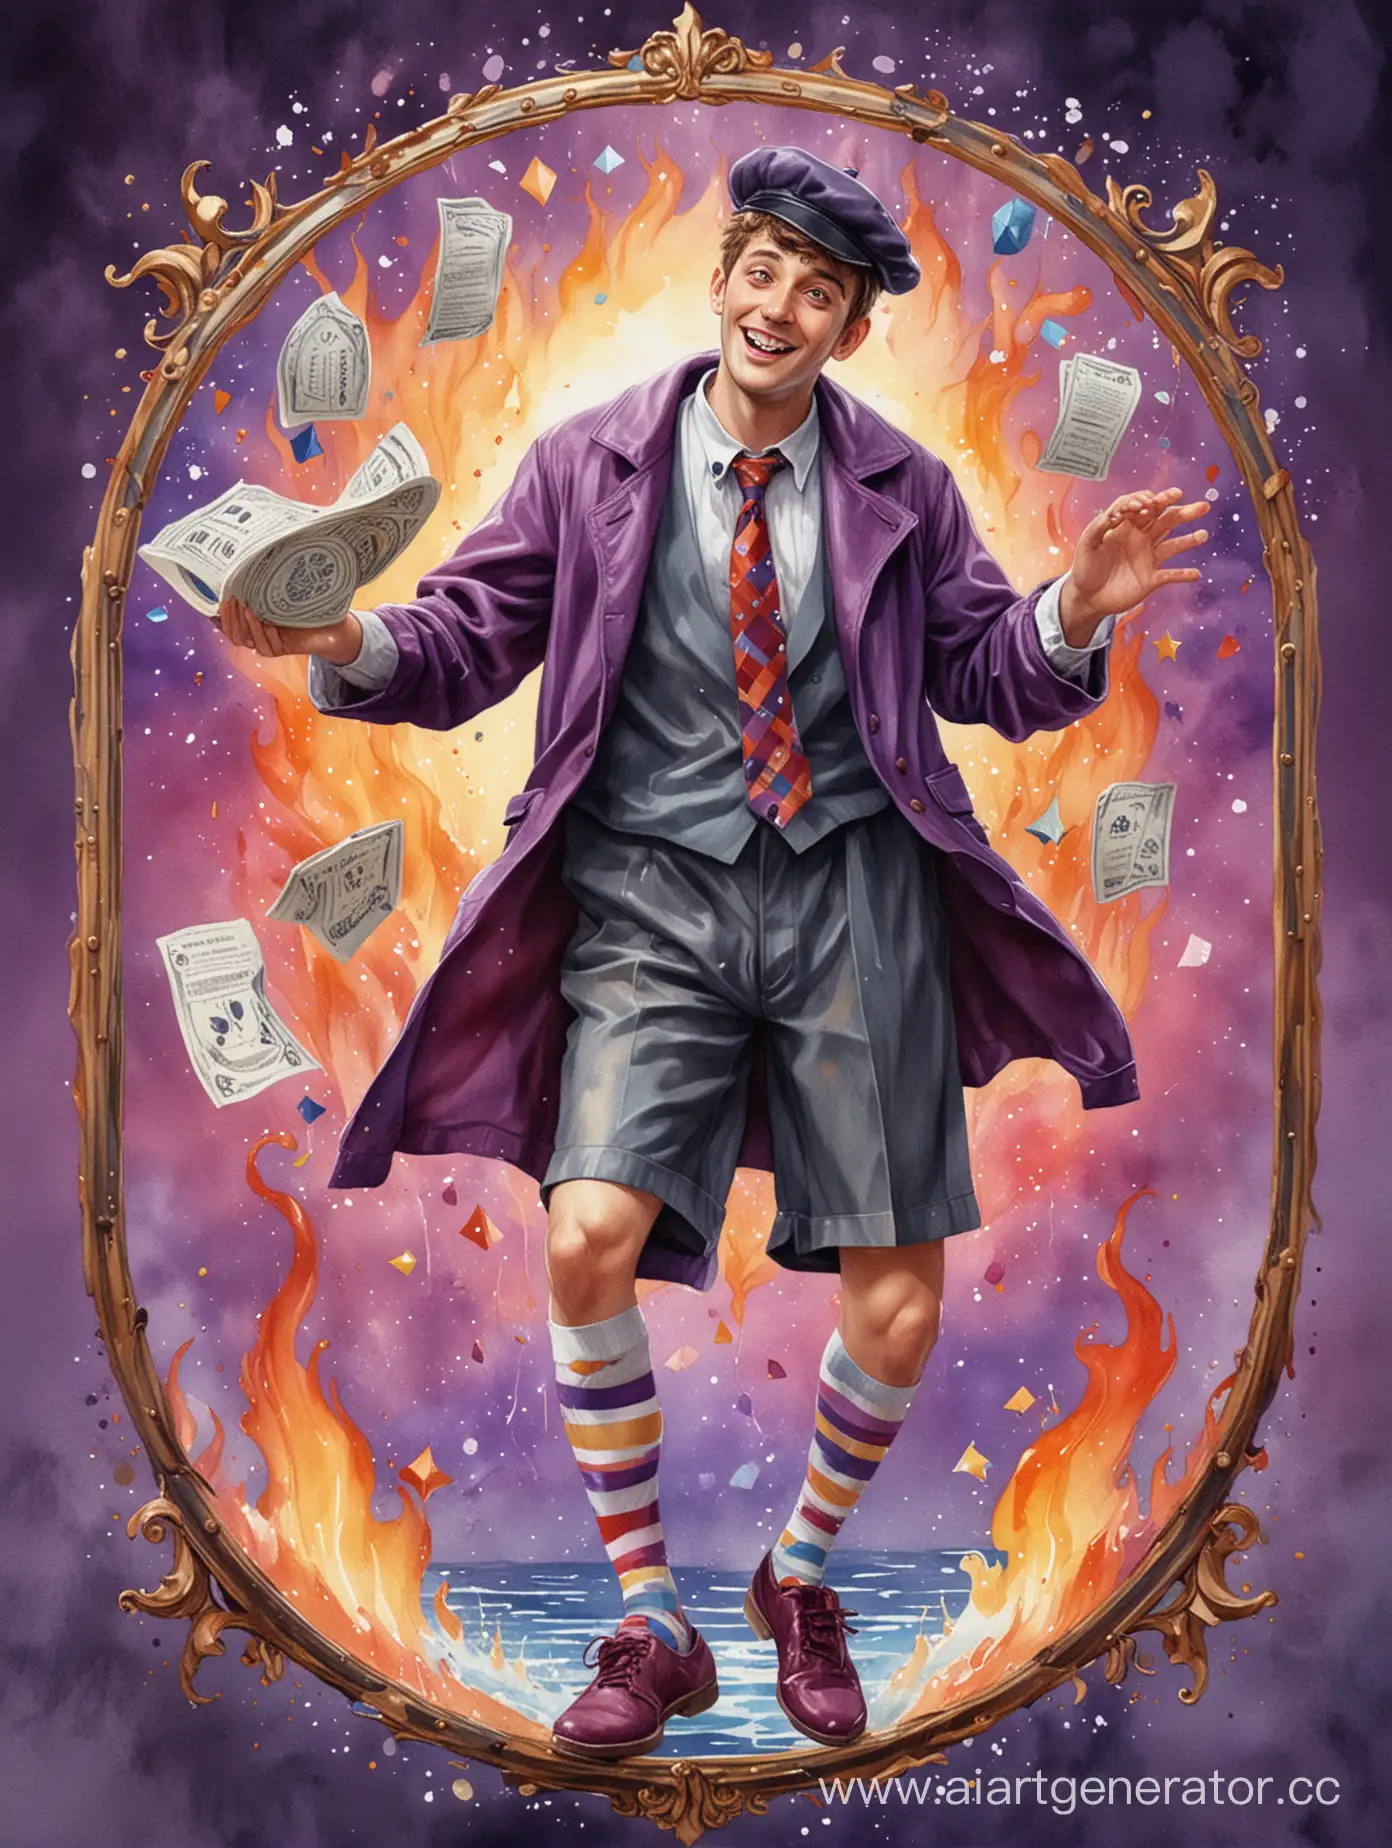 The-Fool-Tarot-Card-in-Watercolor-A-Dance-of-Fire-Water-and-Whimsy